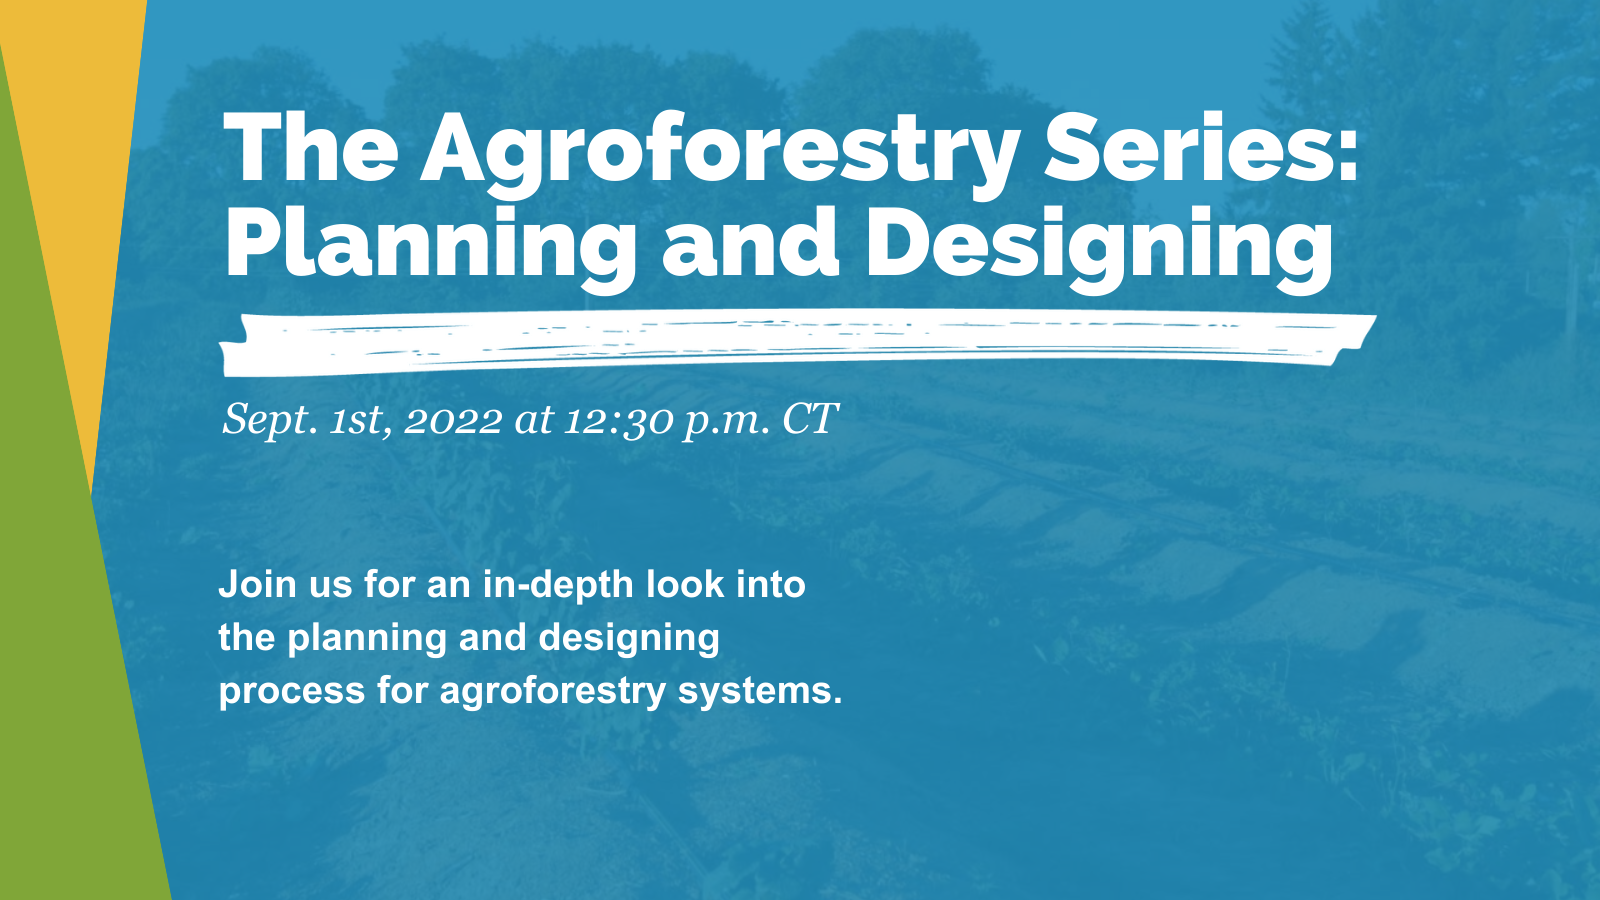 The Agroforestry Series - Planning and Designing